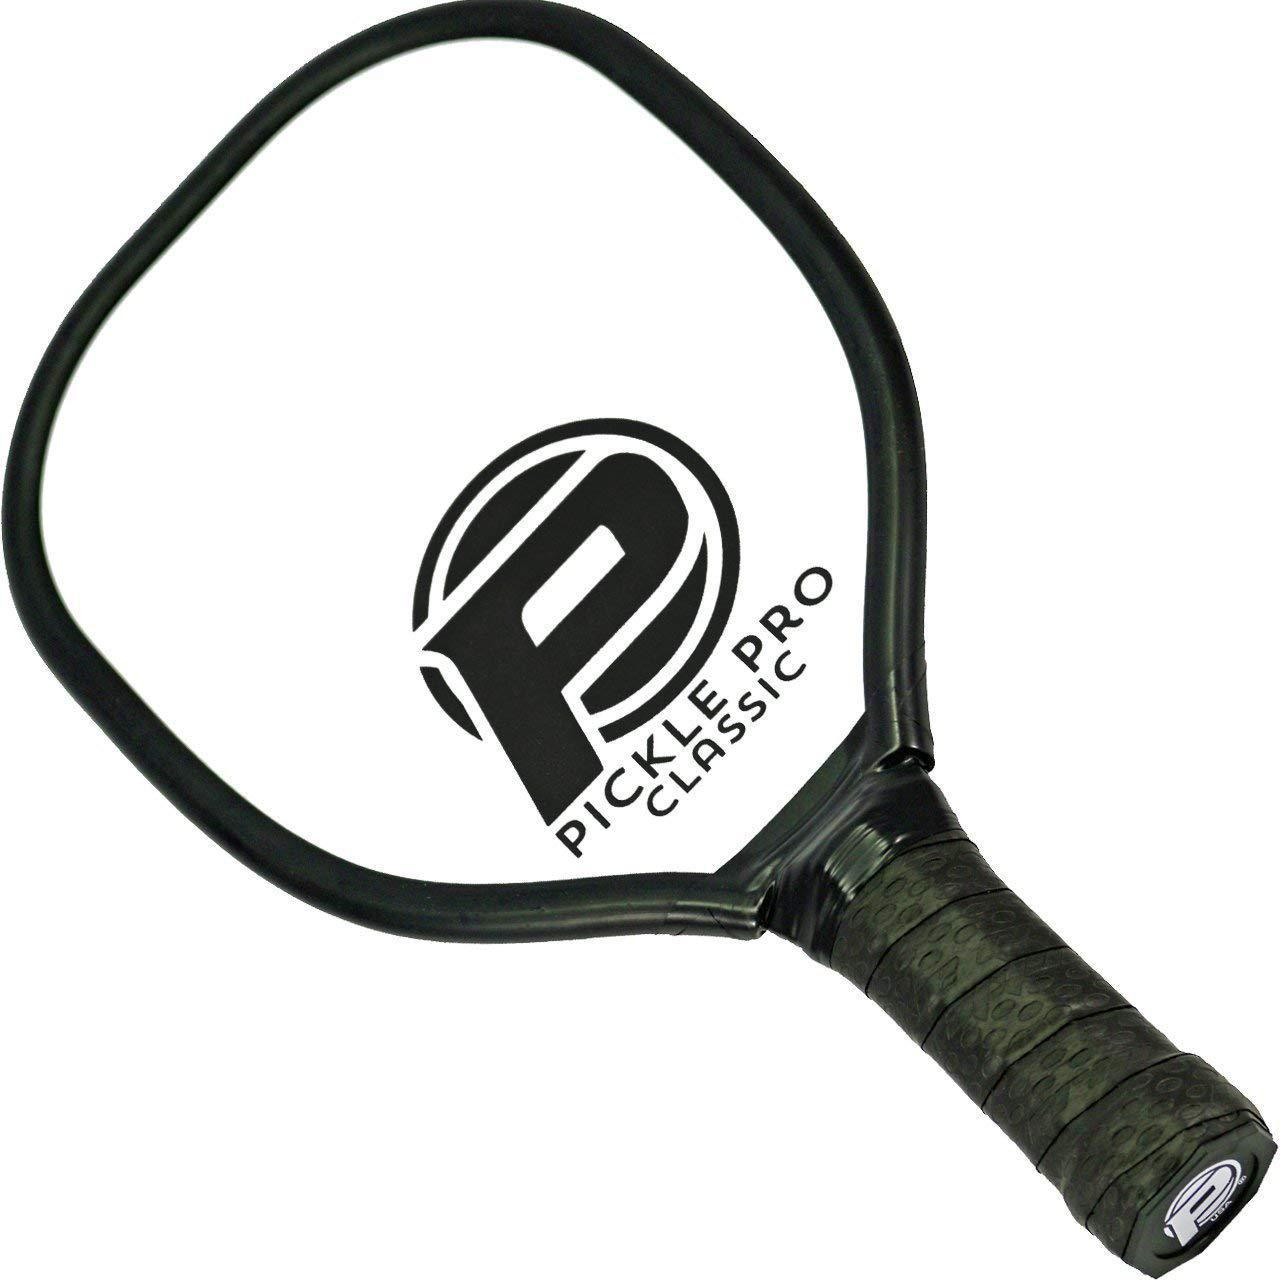 Best Pickleball Paddles in 2022 - Reviews and Buyers Guide